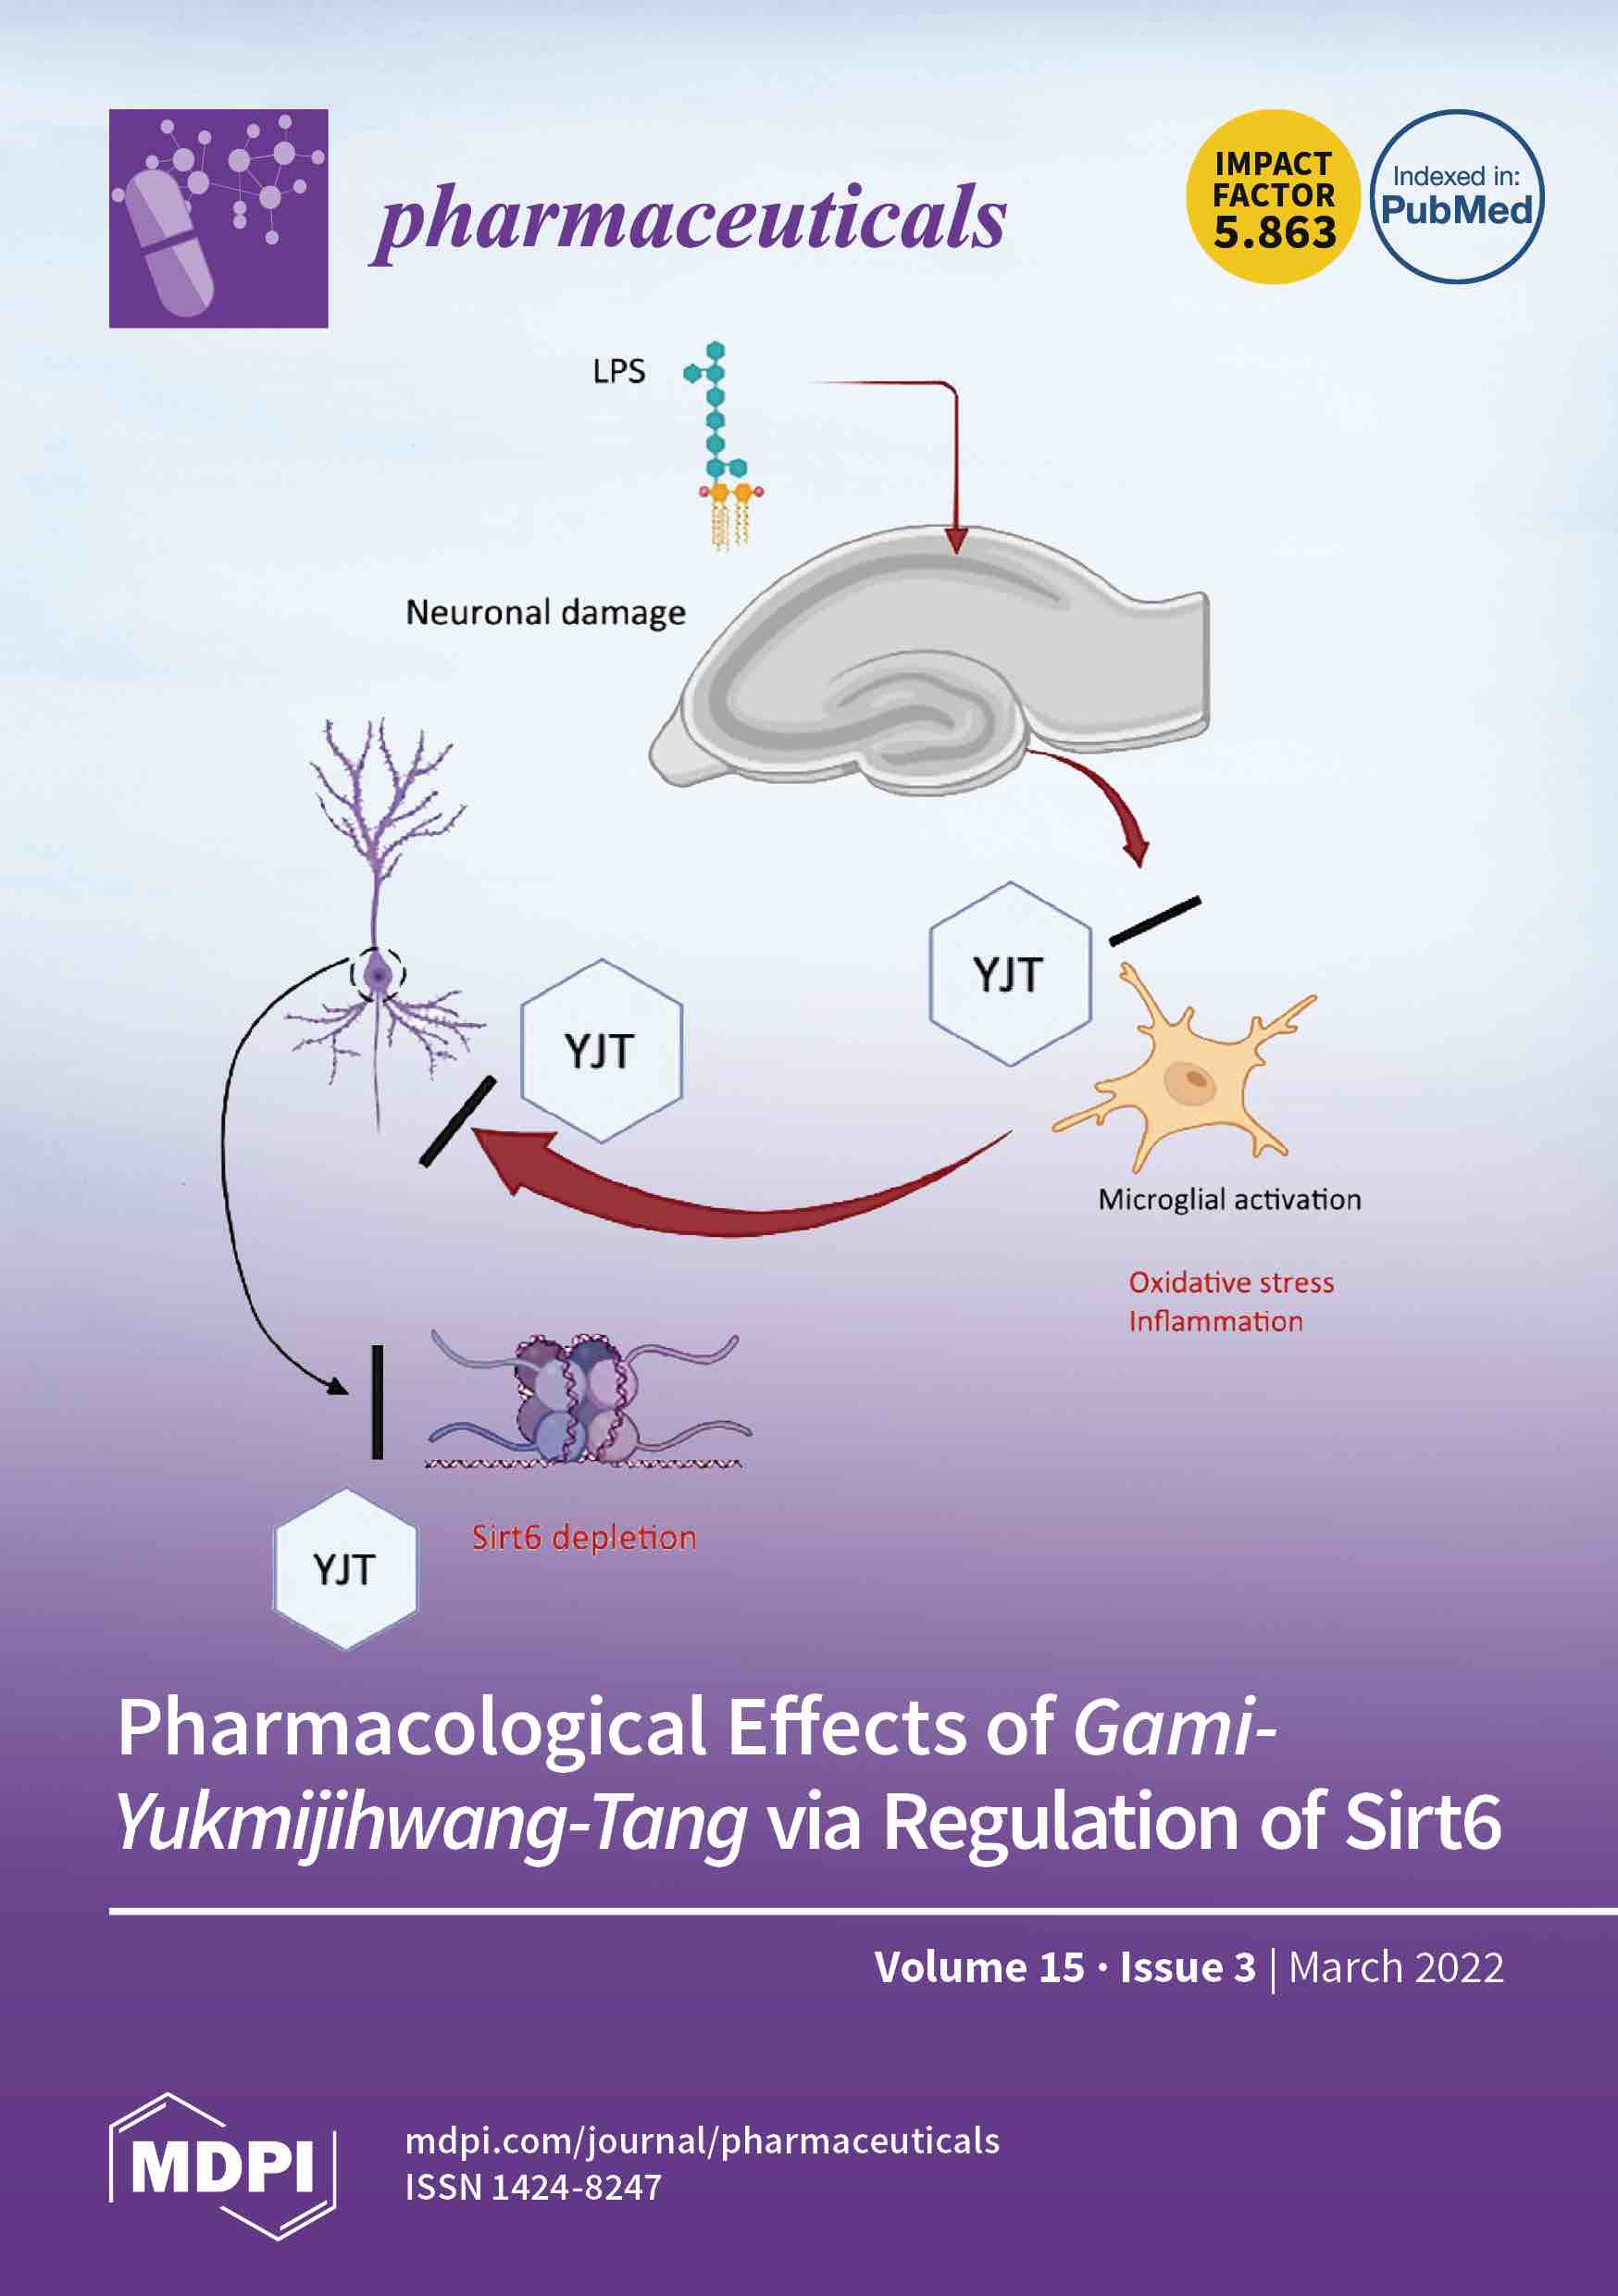 Molecular Signaling Mechanisms for the Antidepressant Effects of NLX-101, a Selective Cortical 5-HT 1A Receptor Biased Agonist